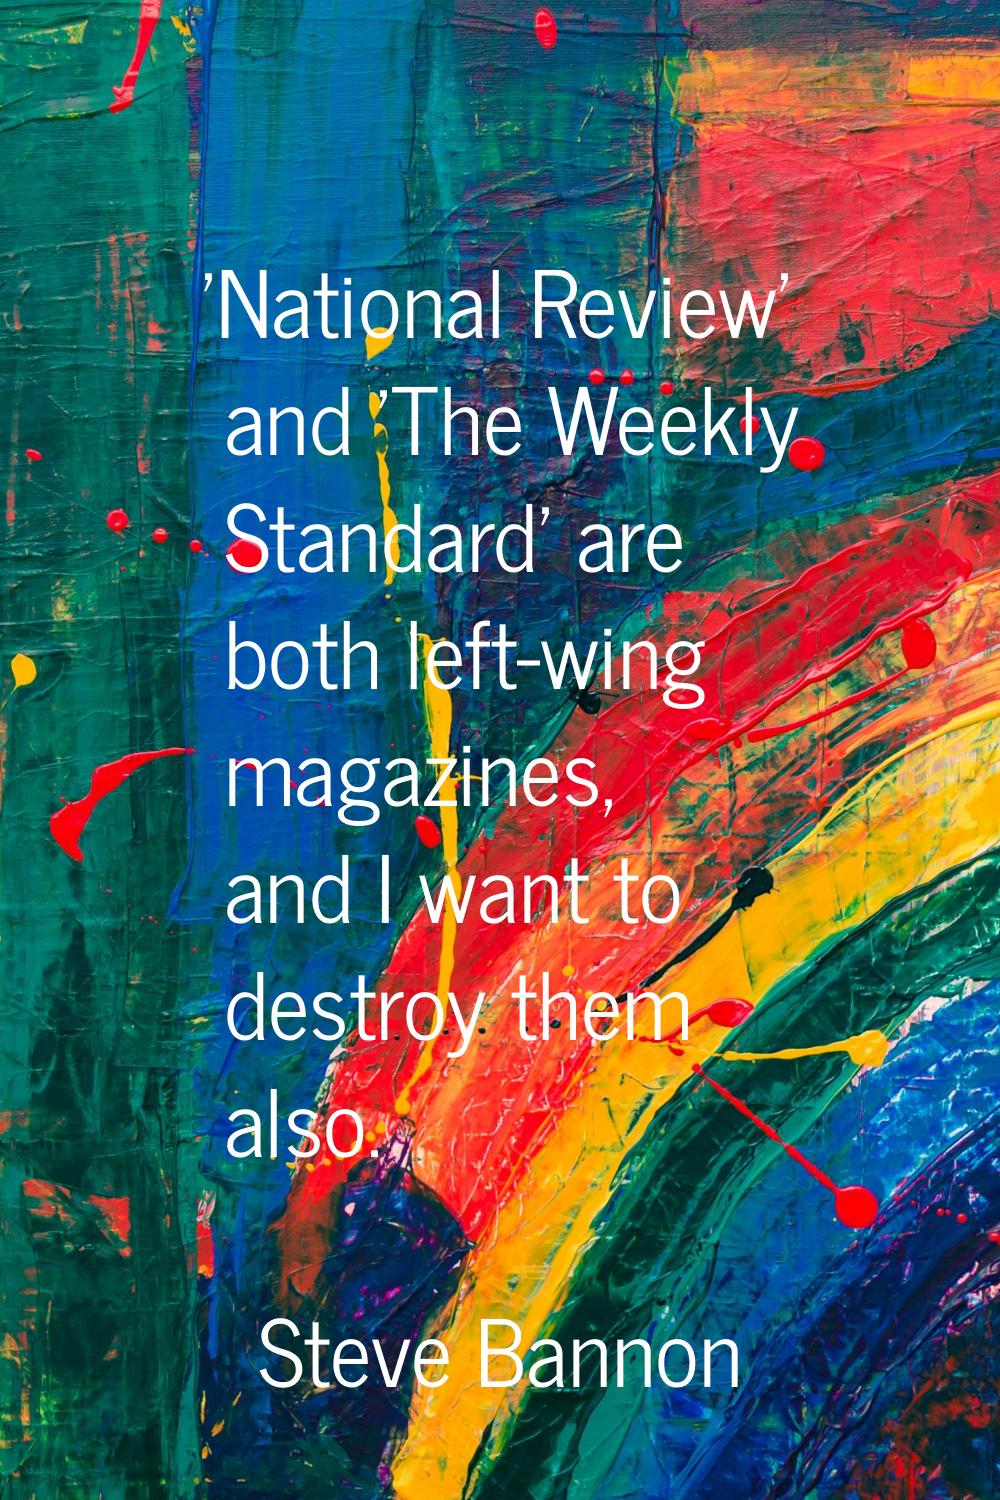 'National Review' and 'The Weekly Standard' are both left-wing magazines, and I want to destroy the